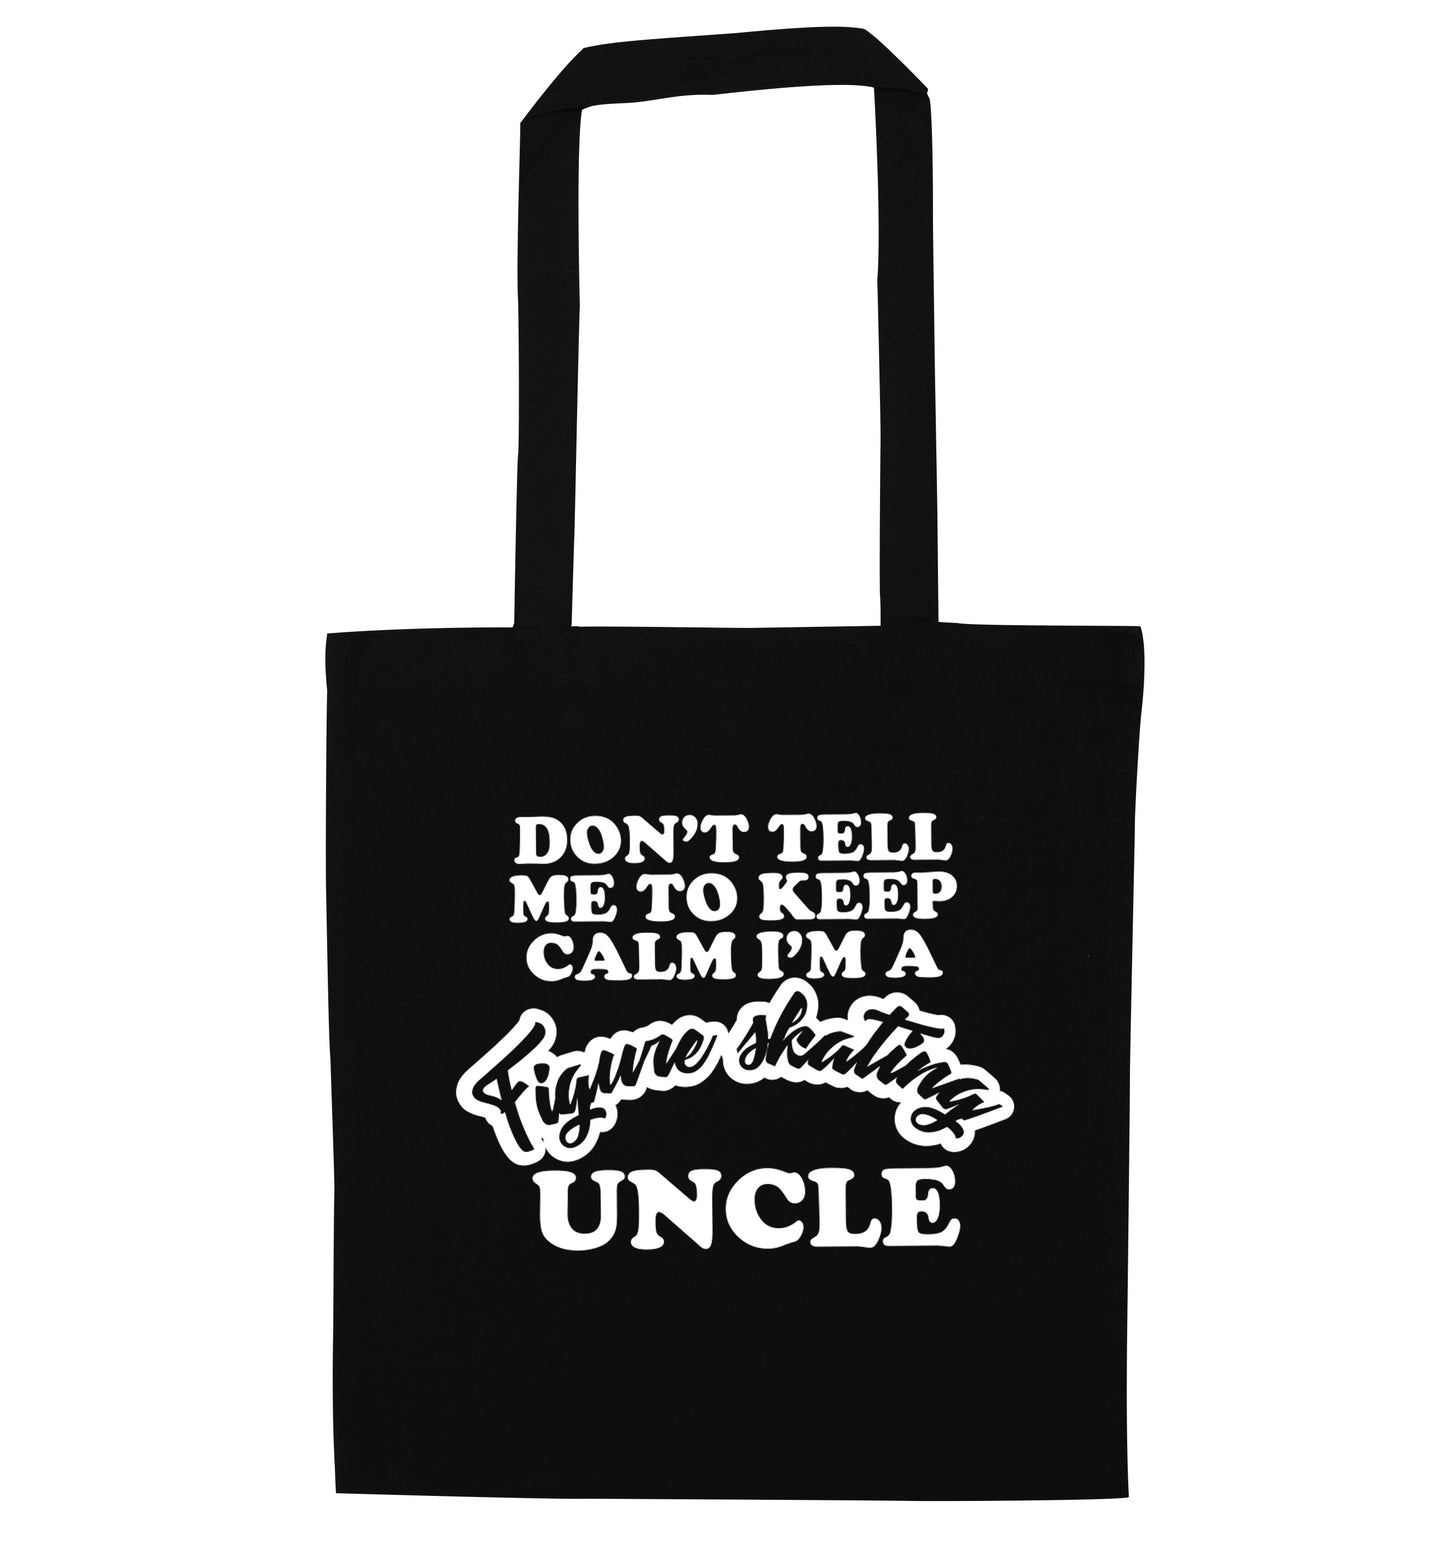 Don't tell me to keep calm I'm a figure skating uncle black tote bag